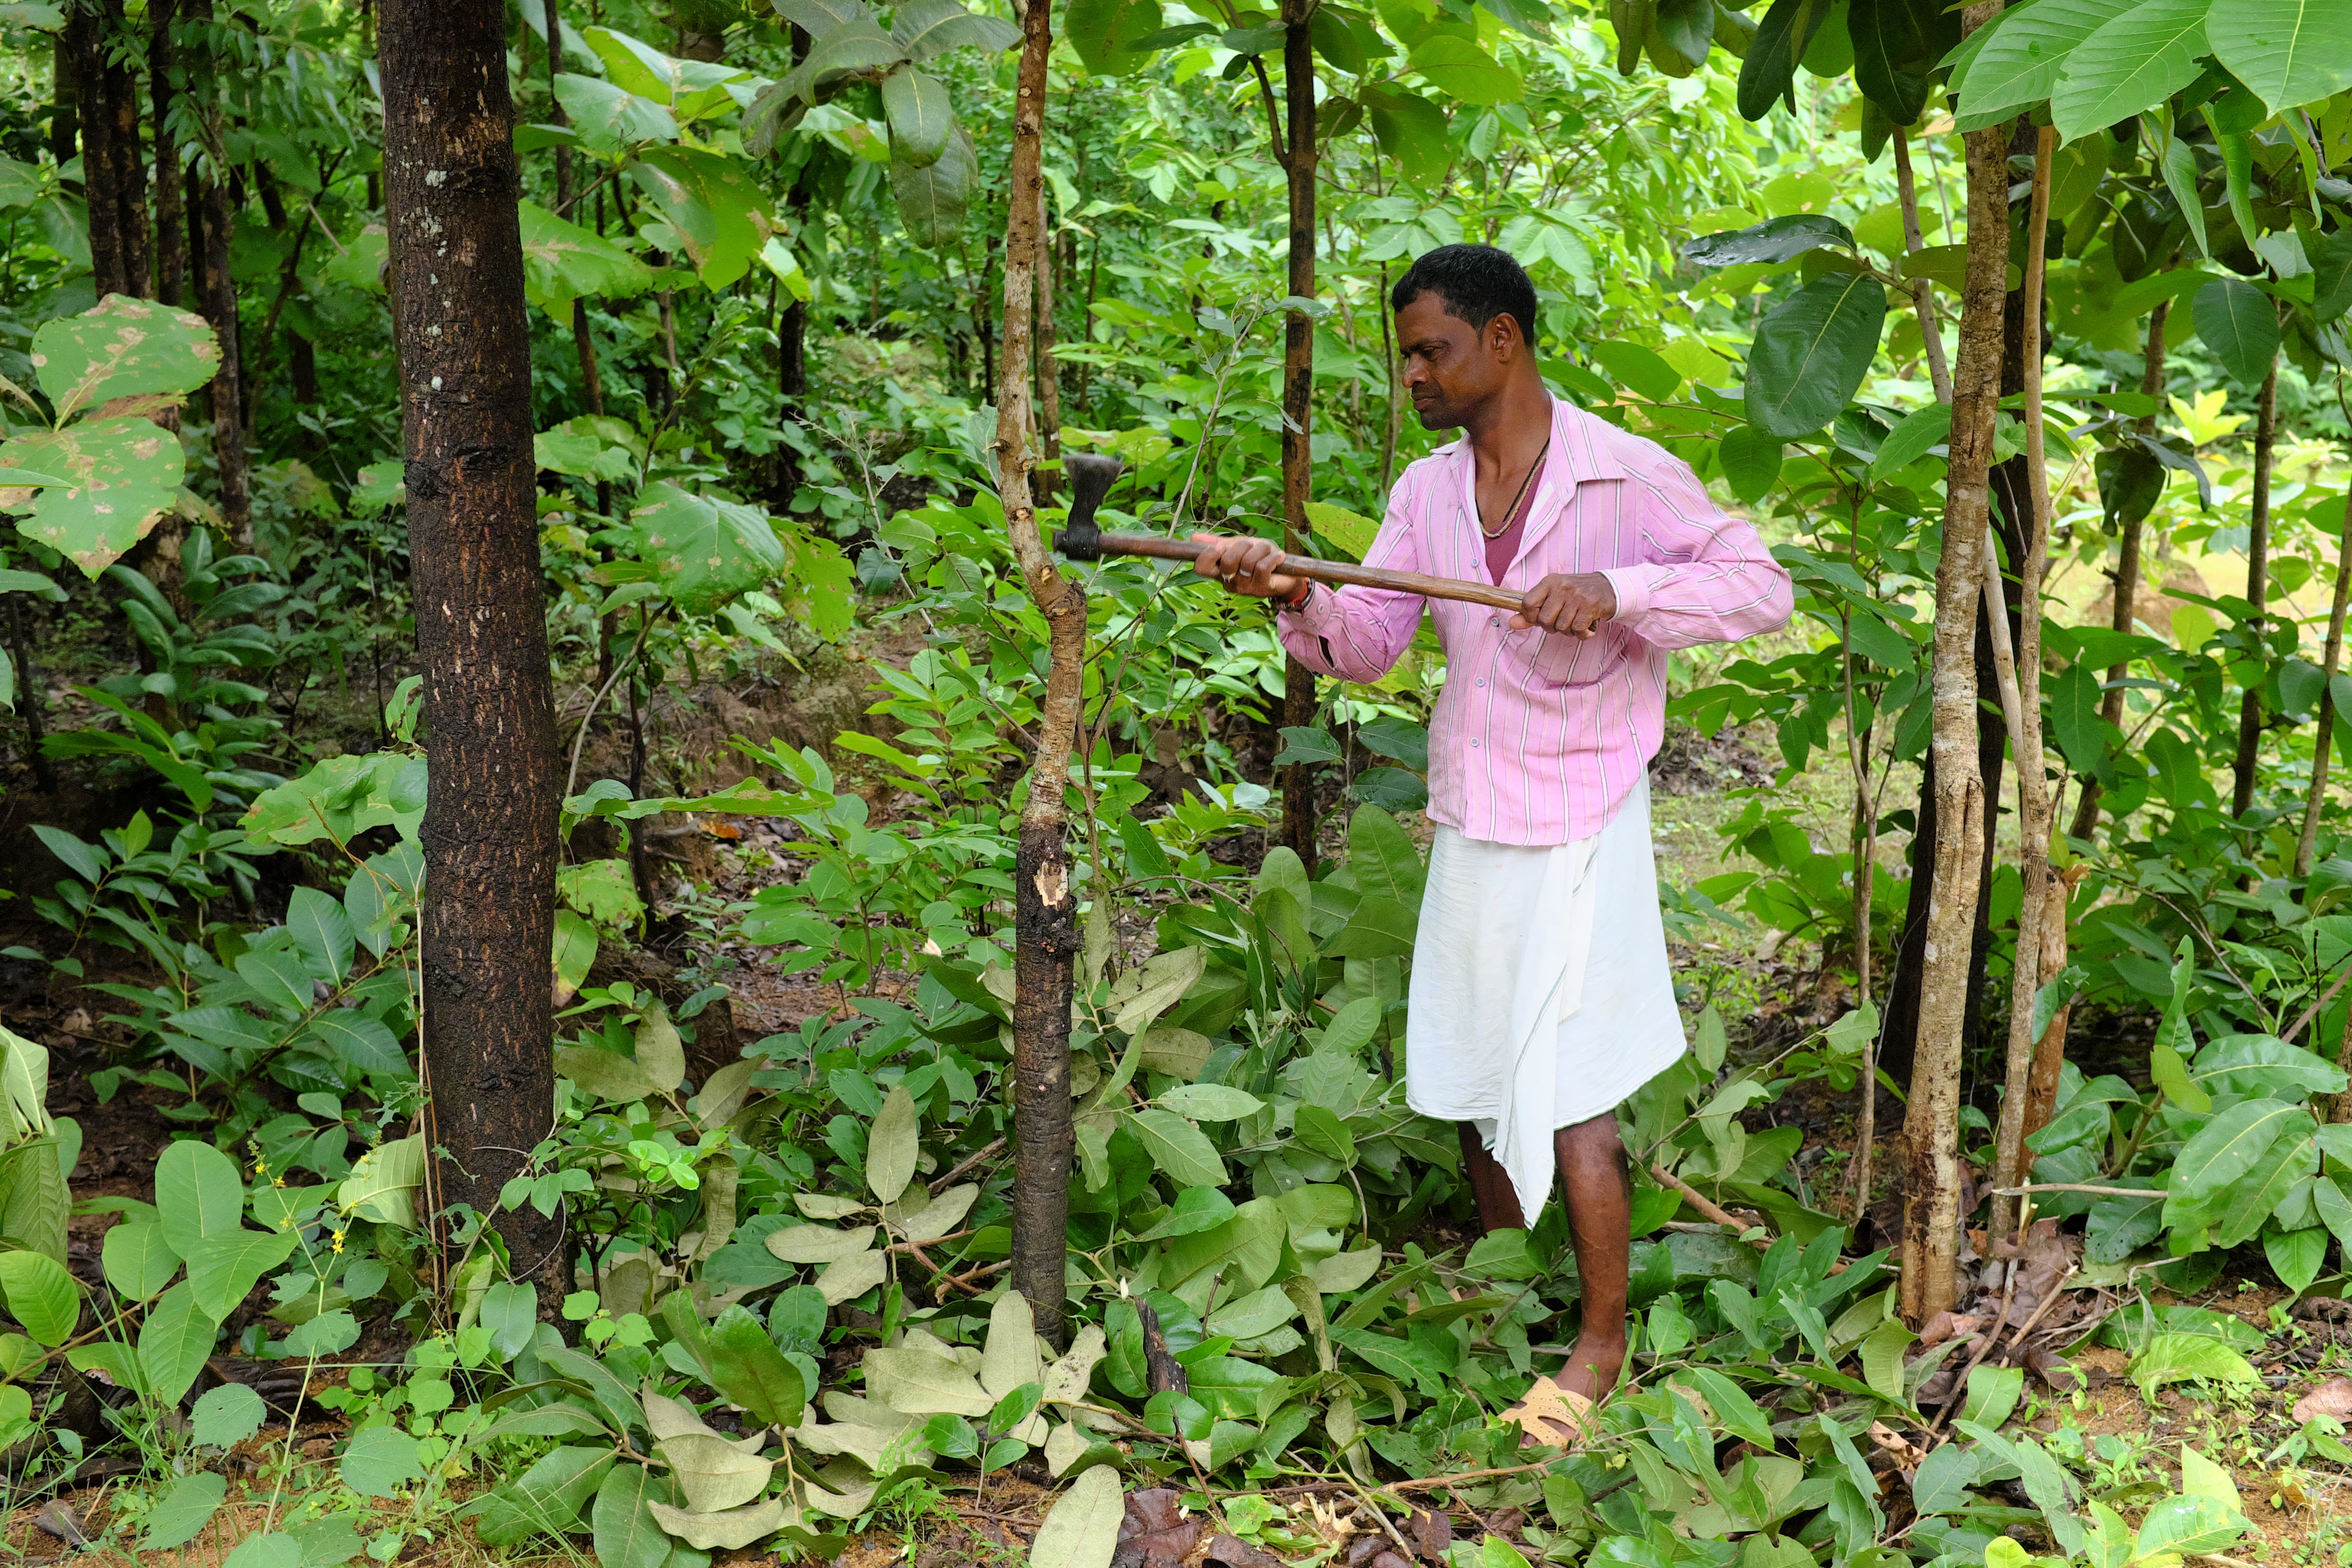 Member of the village's forest rights committee